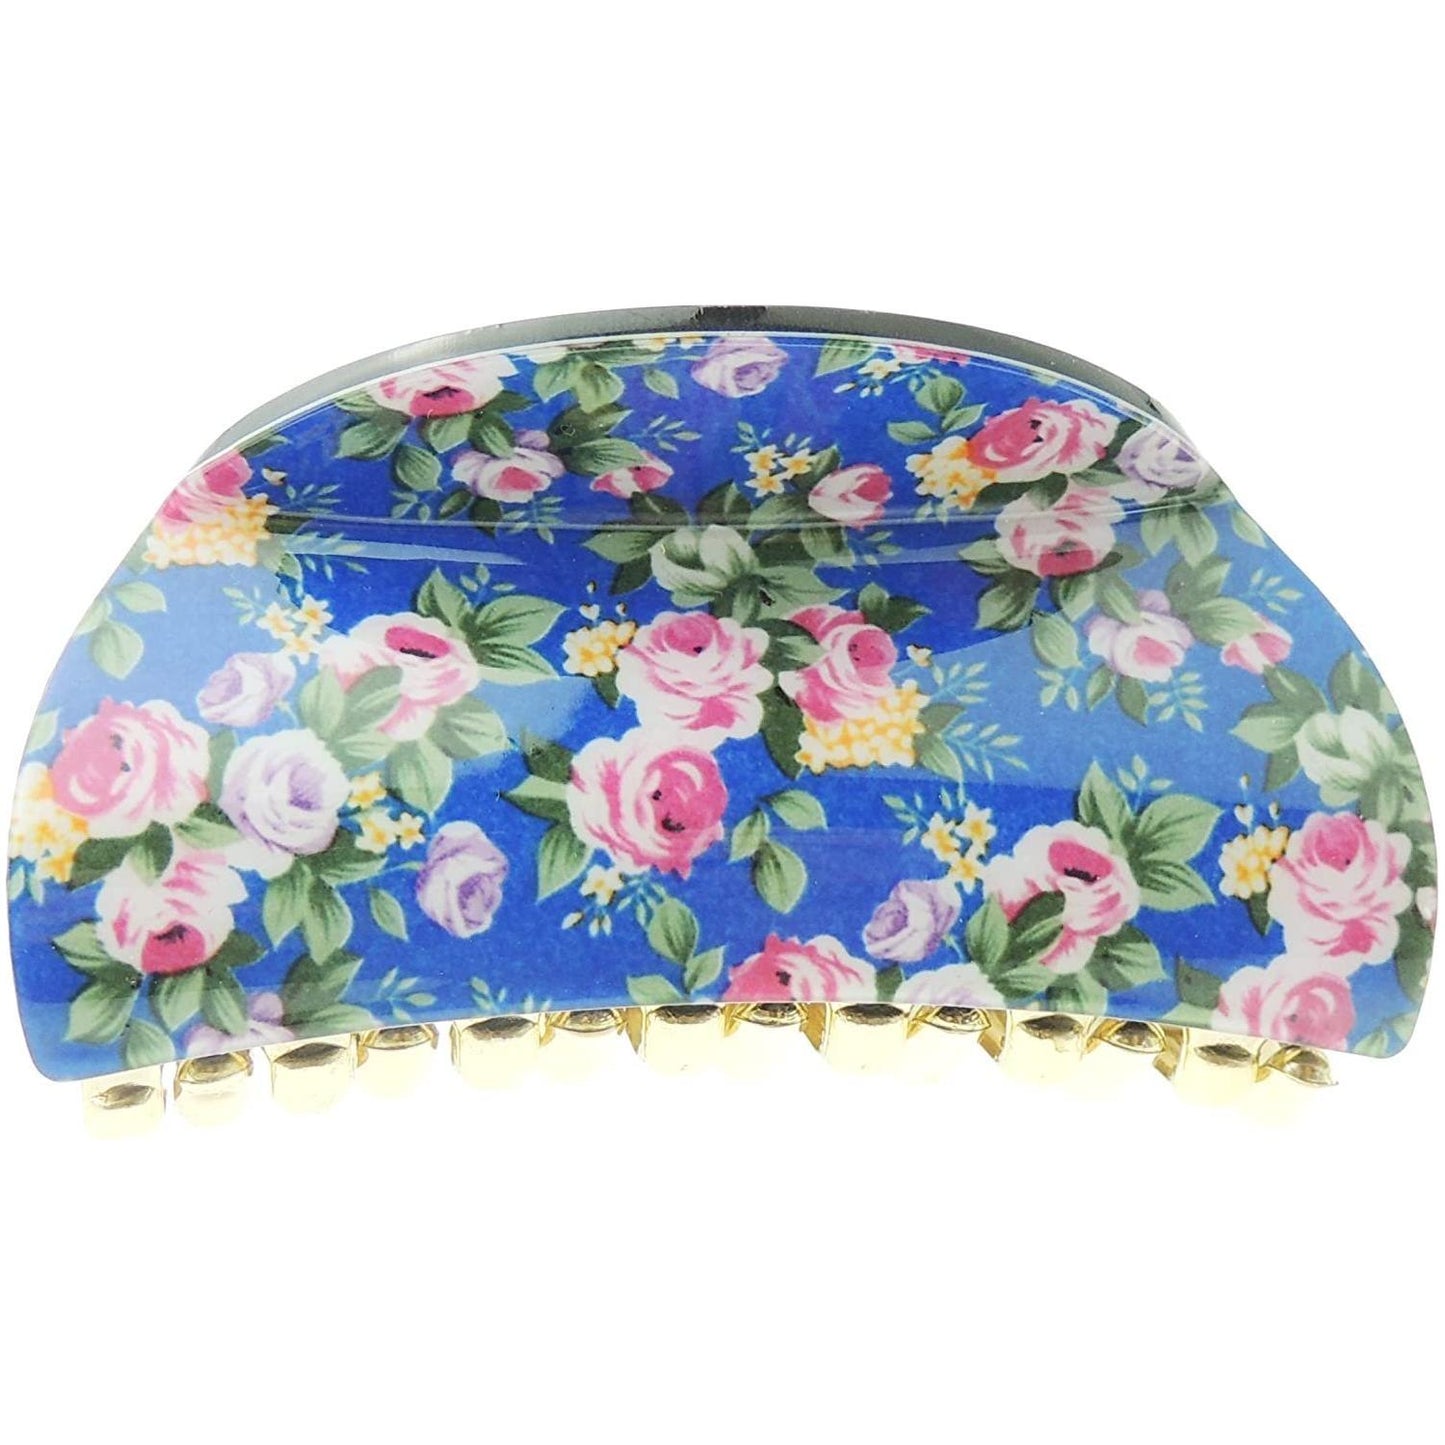 Ladies Floral English Garden Print Covered Oval Rounded Hair Claw Clamp Clip